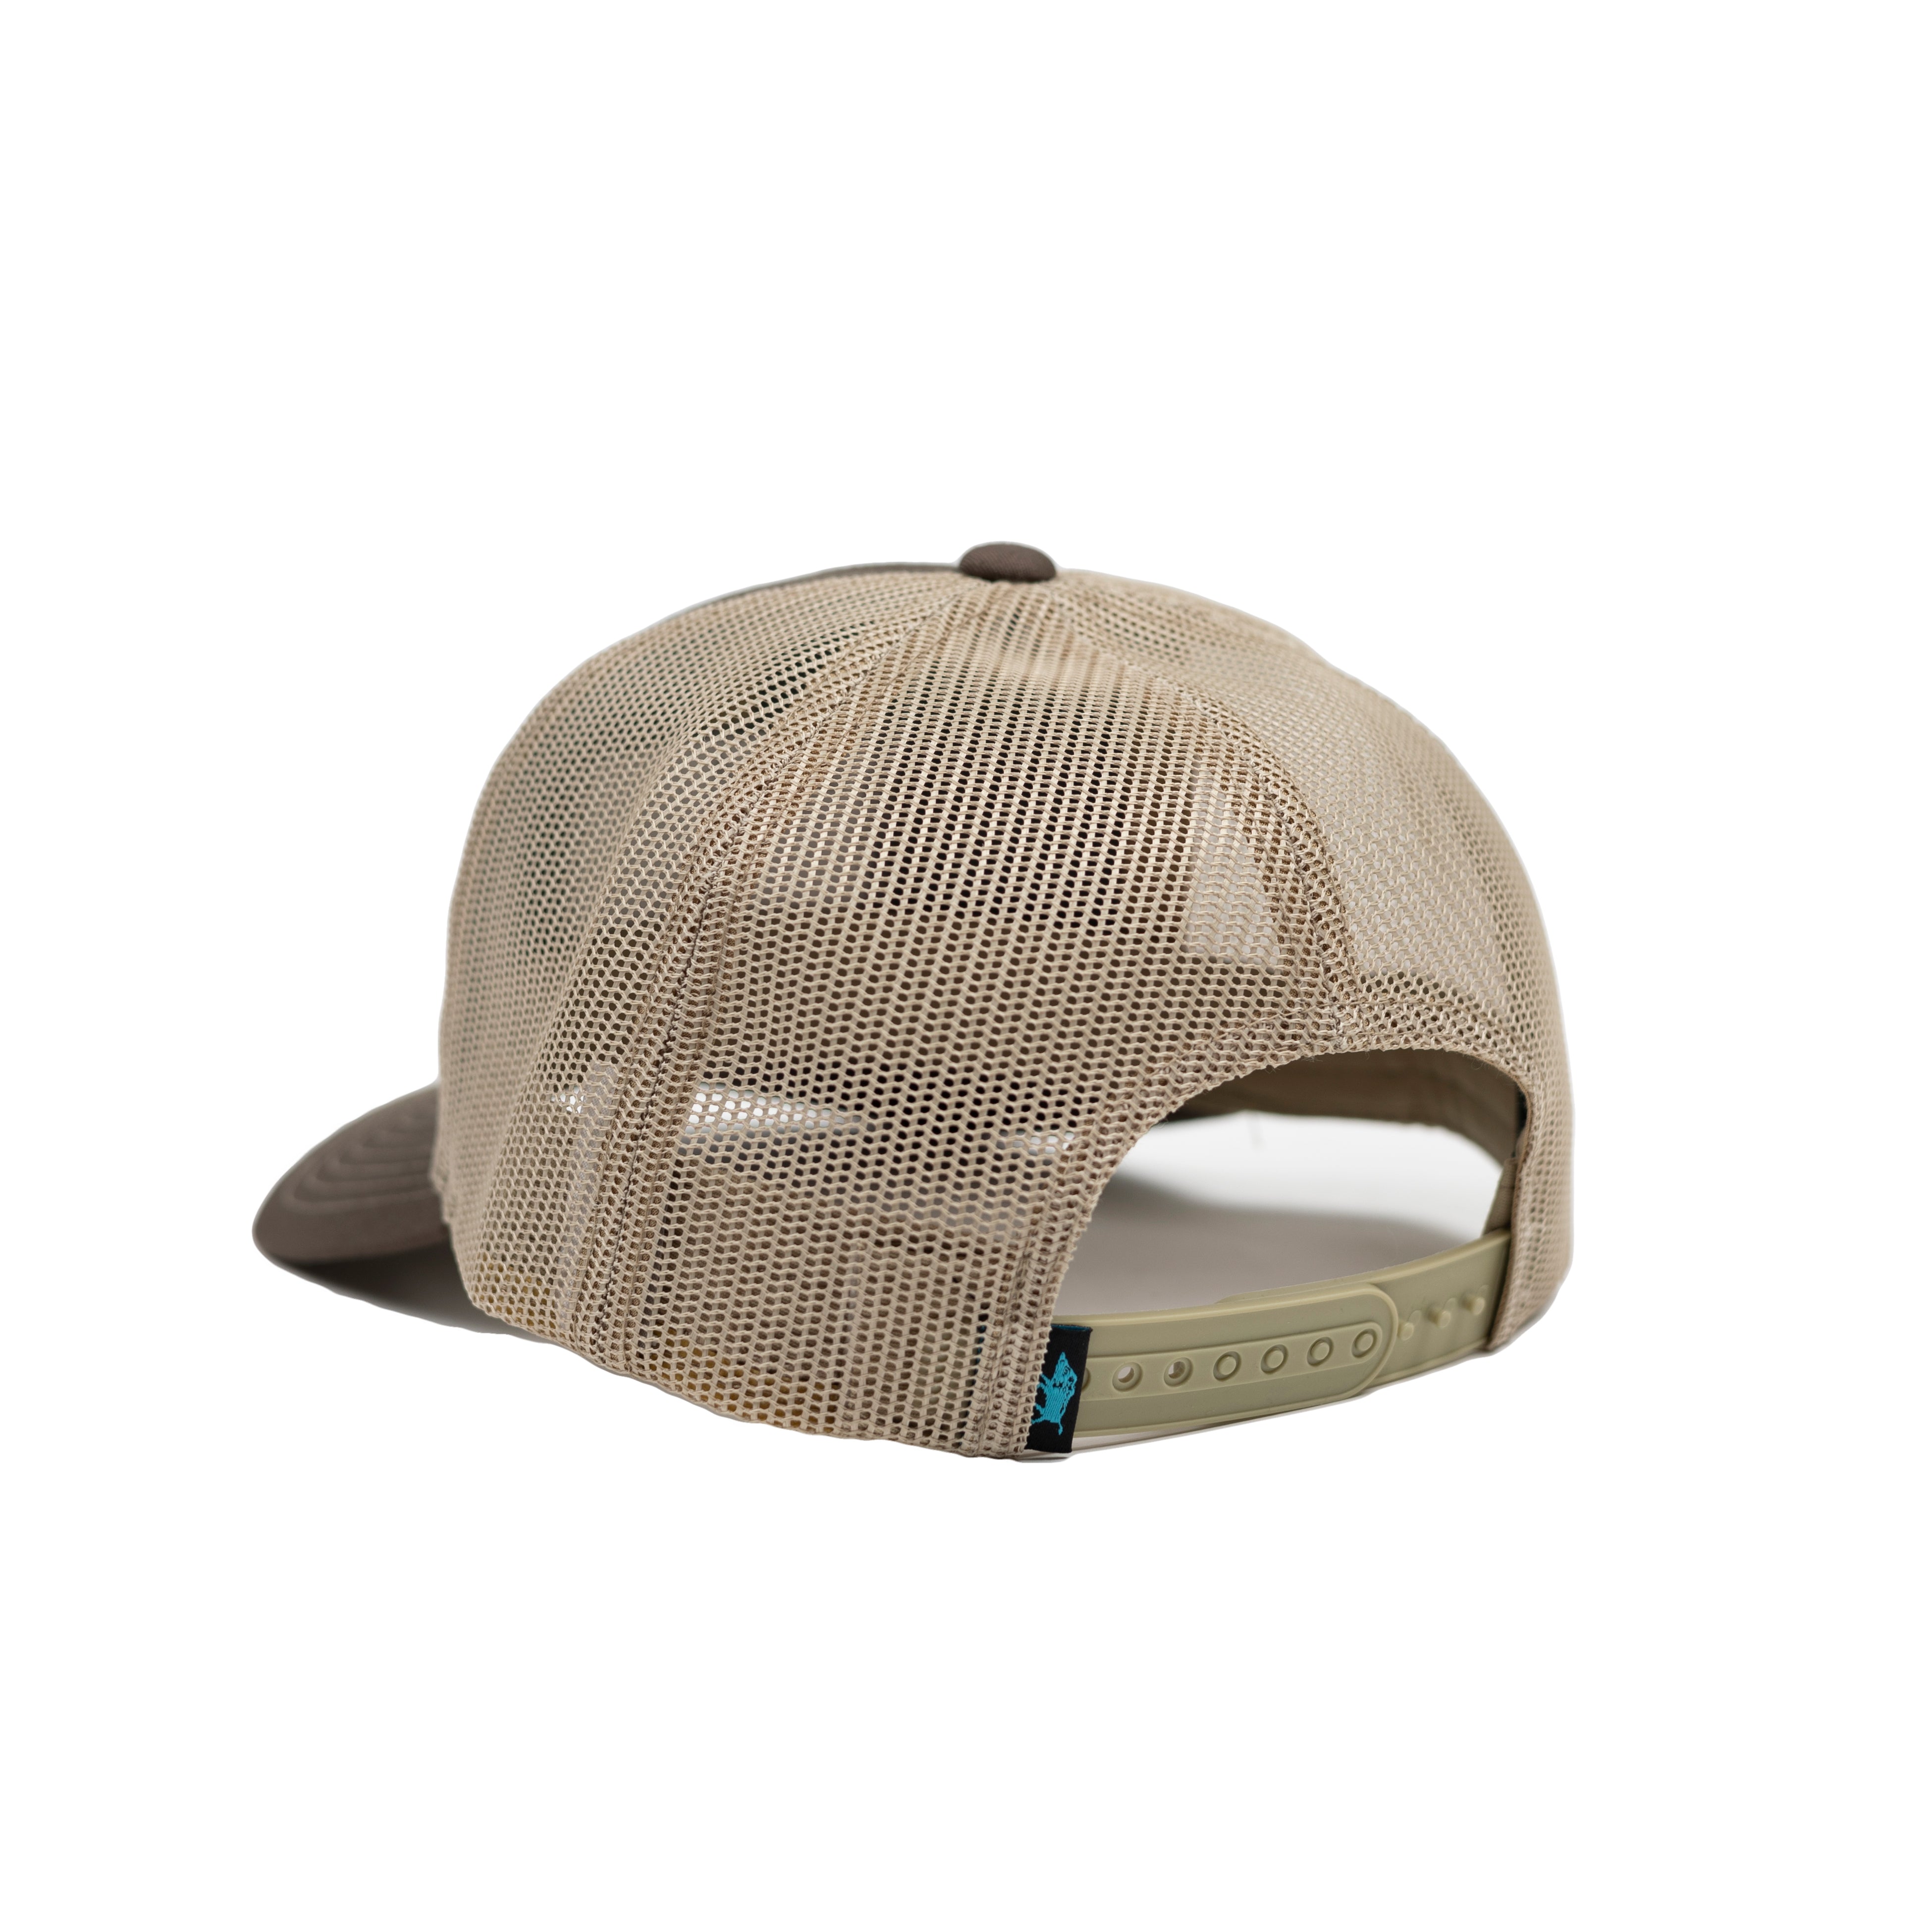 Surfing Boar Patch Snapback Brown / Khaki / Red